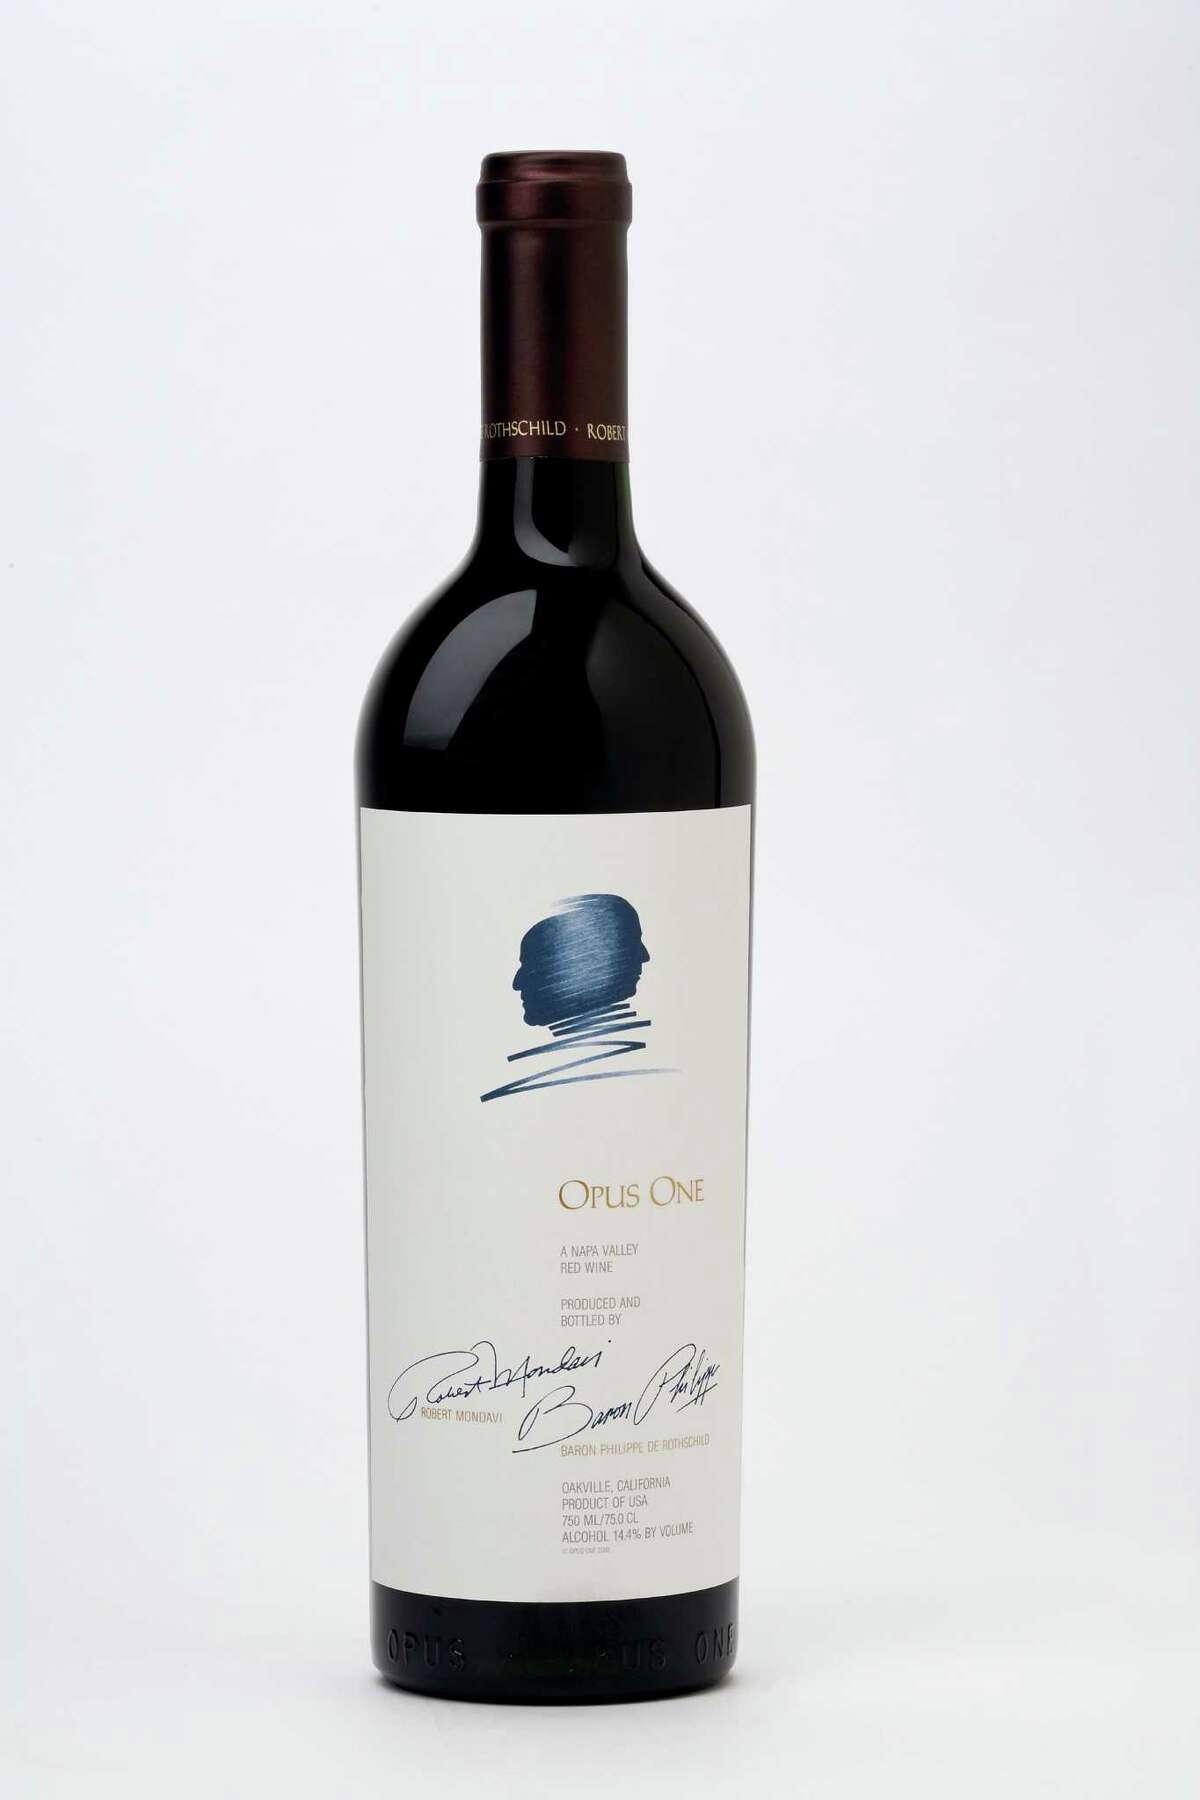 2014 opus one red wine